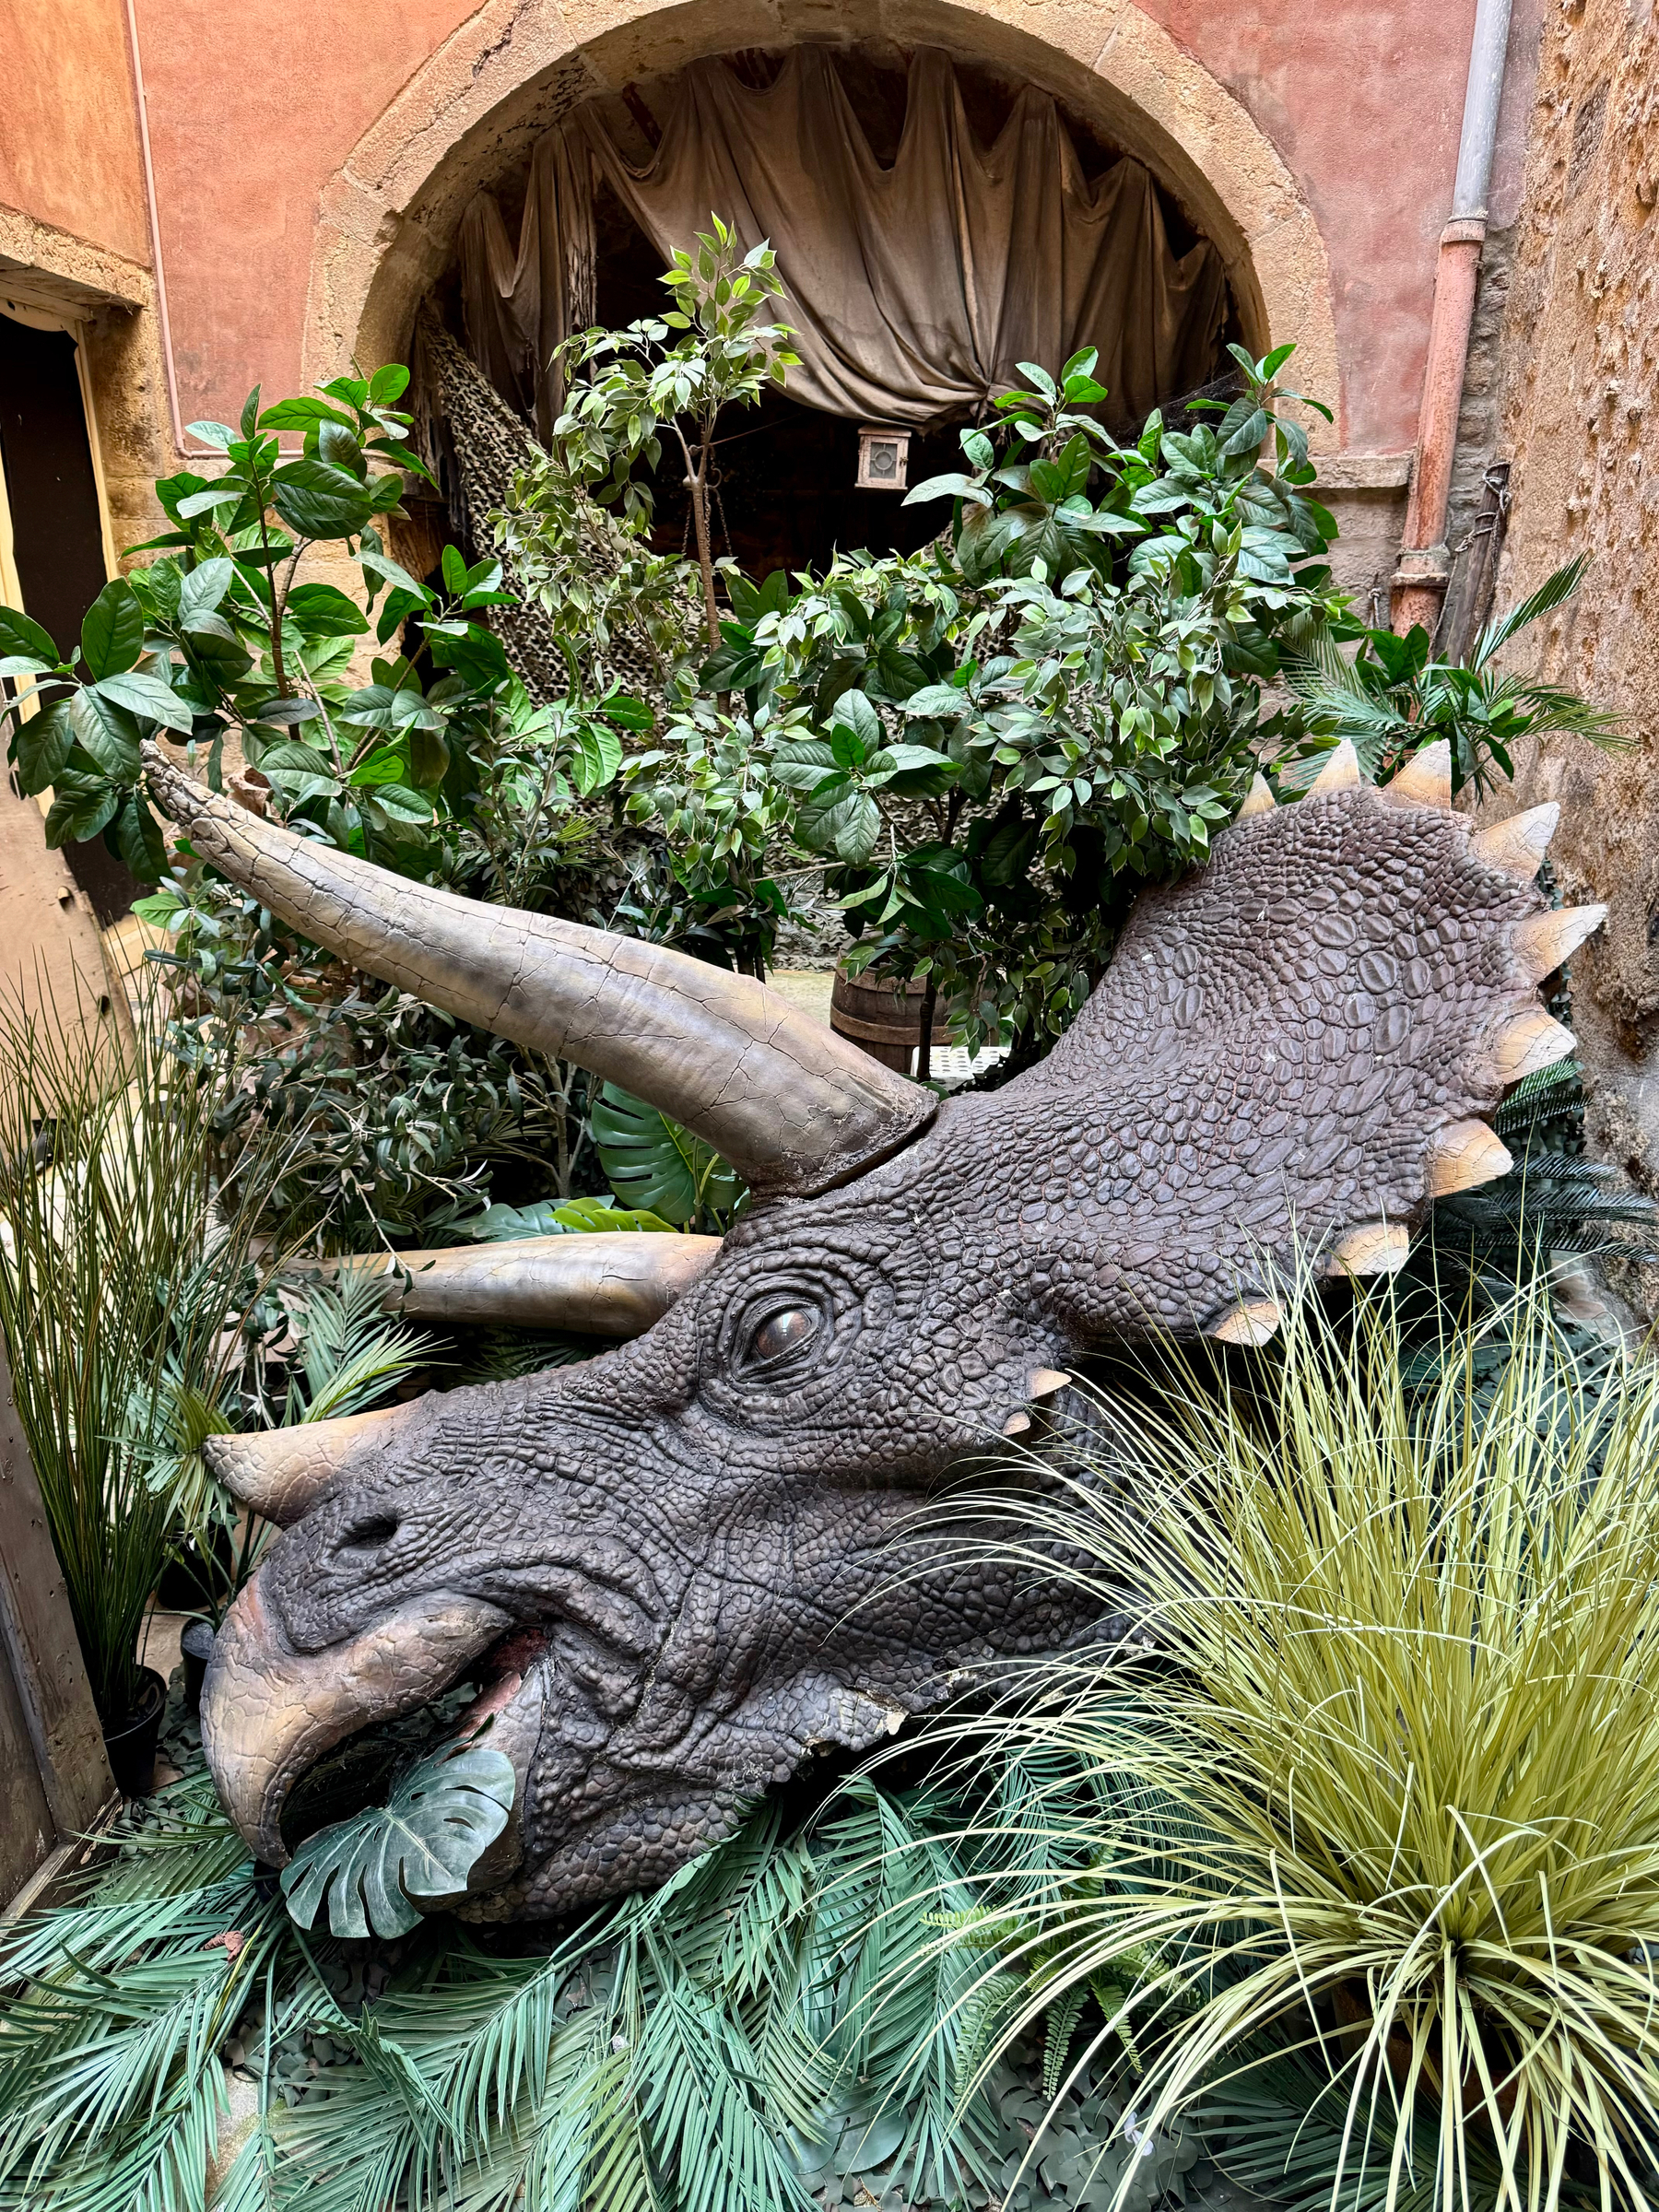 A life-size model of a Triceratops head in a lush garden with plants, positioned in front of an arched doorway draped with a curtain.